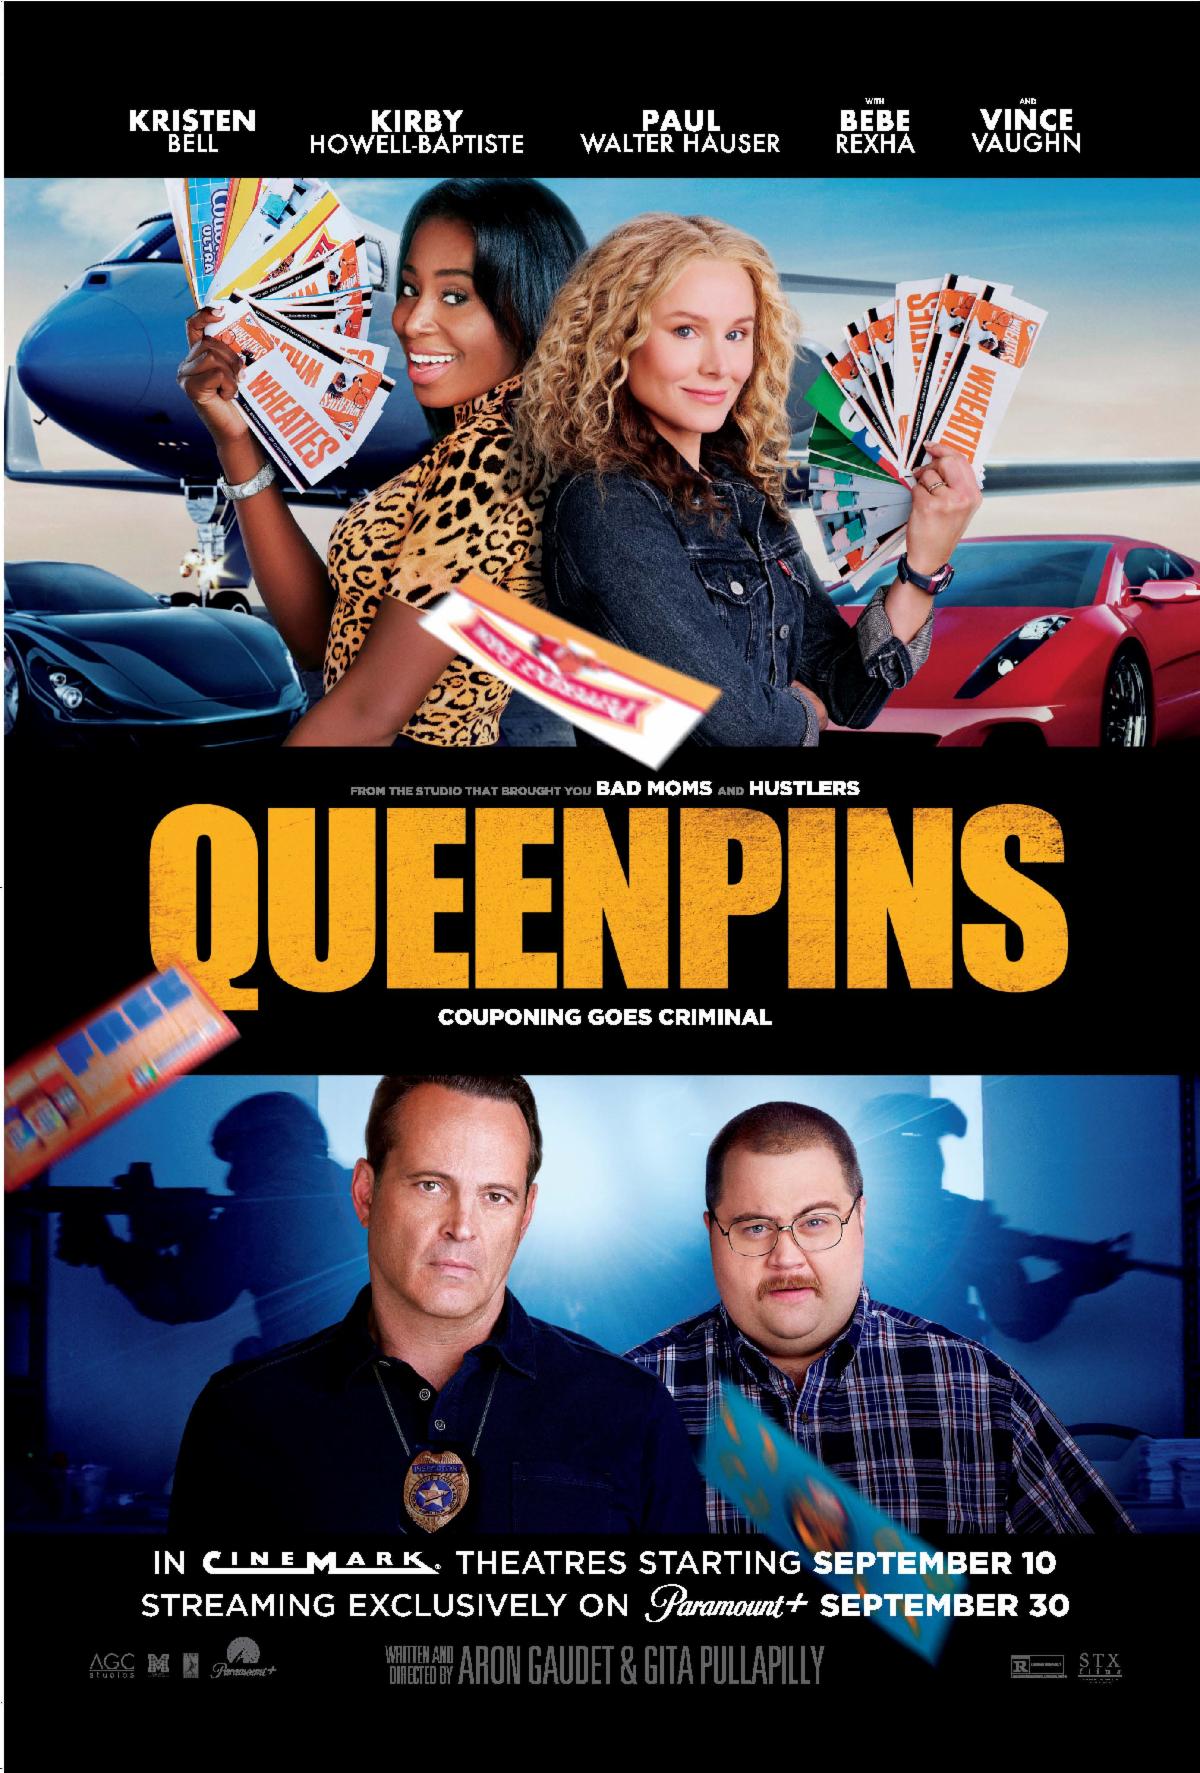 QUEENPINS – Out in Theatres September 10